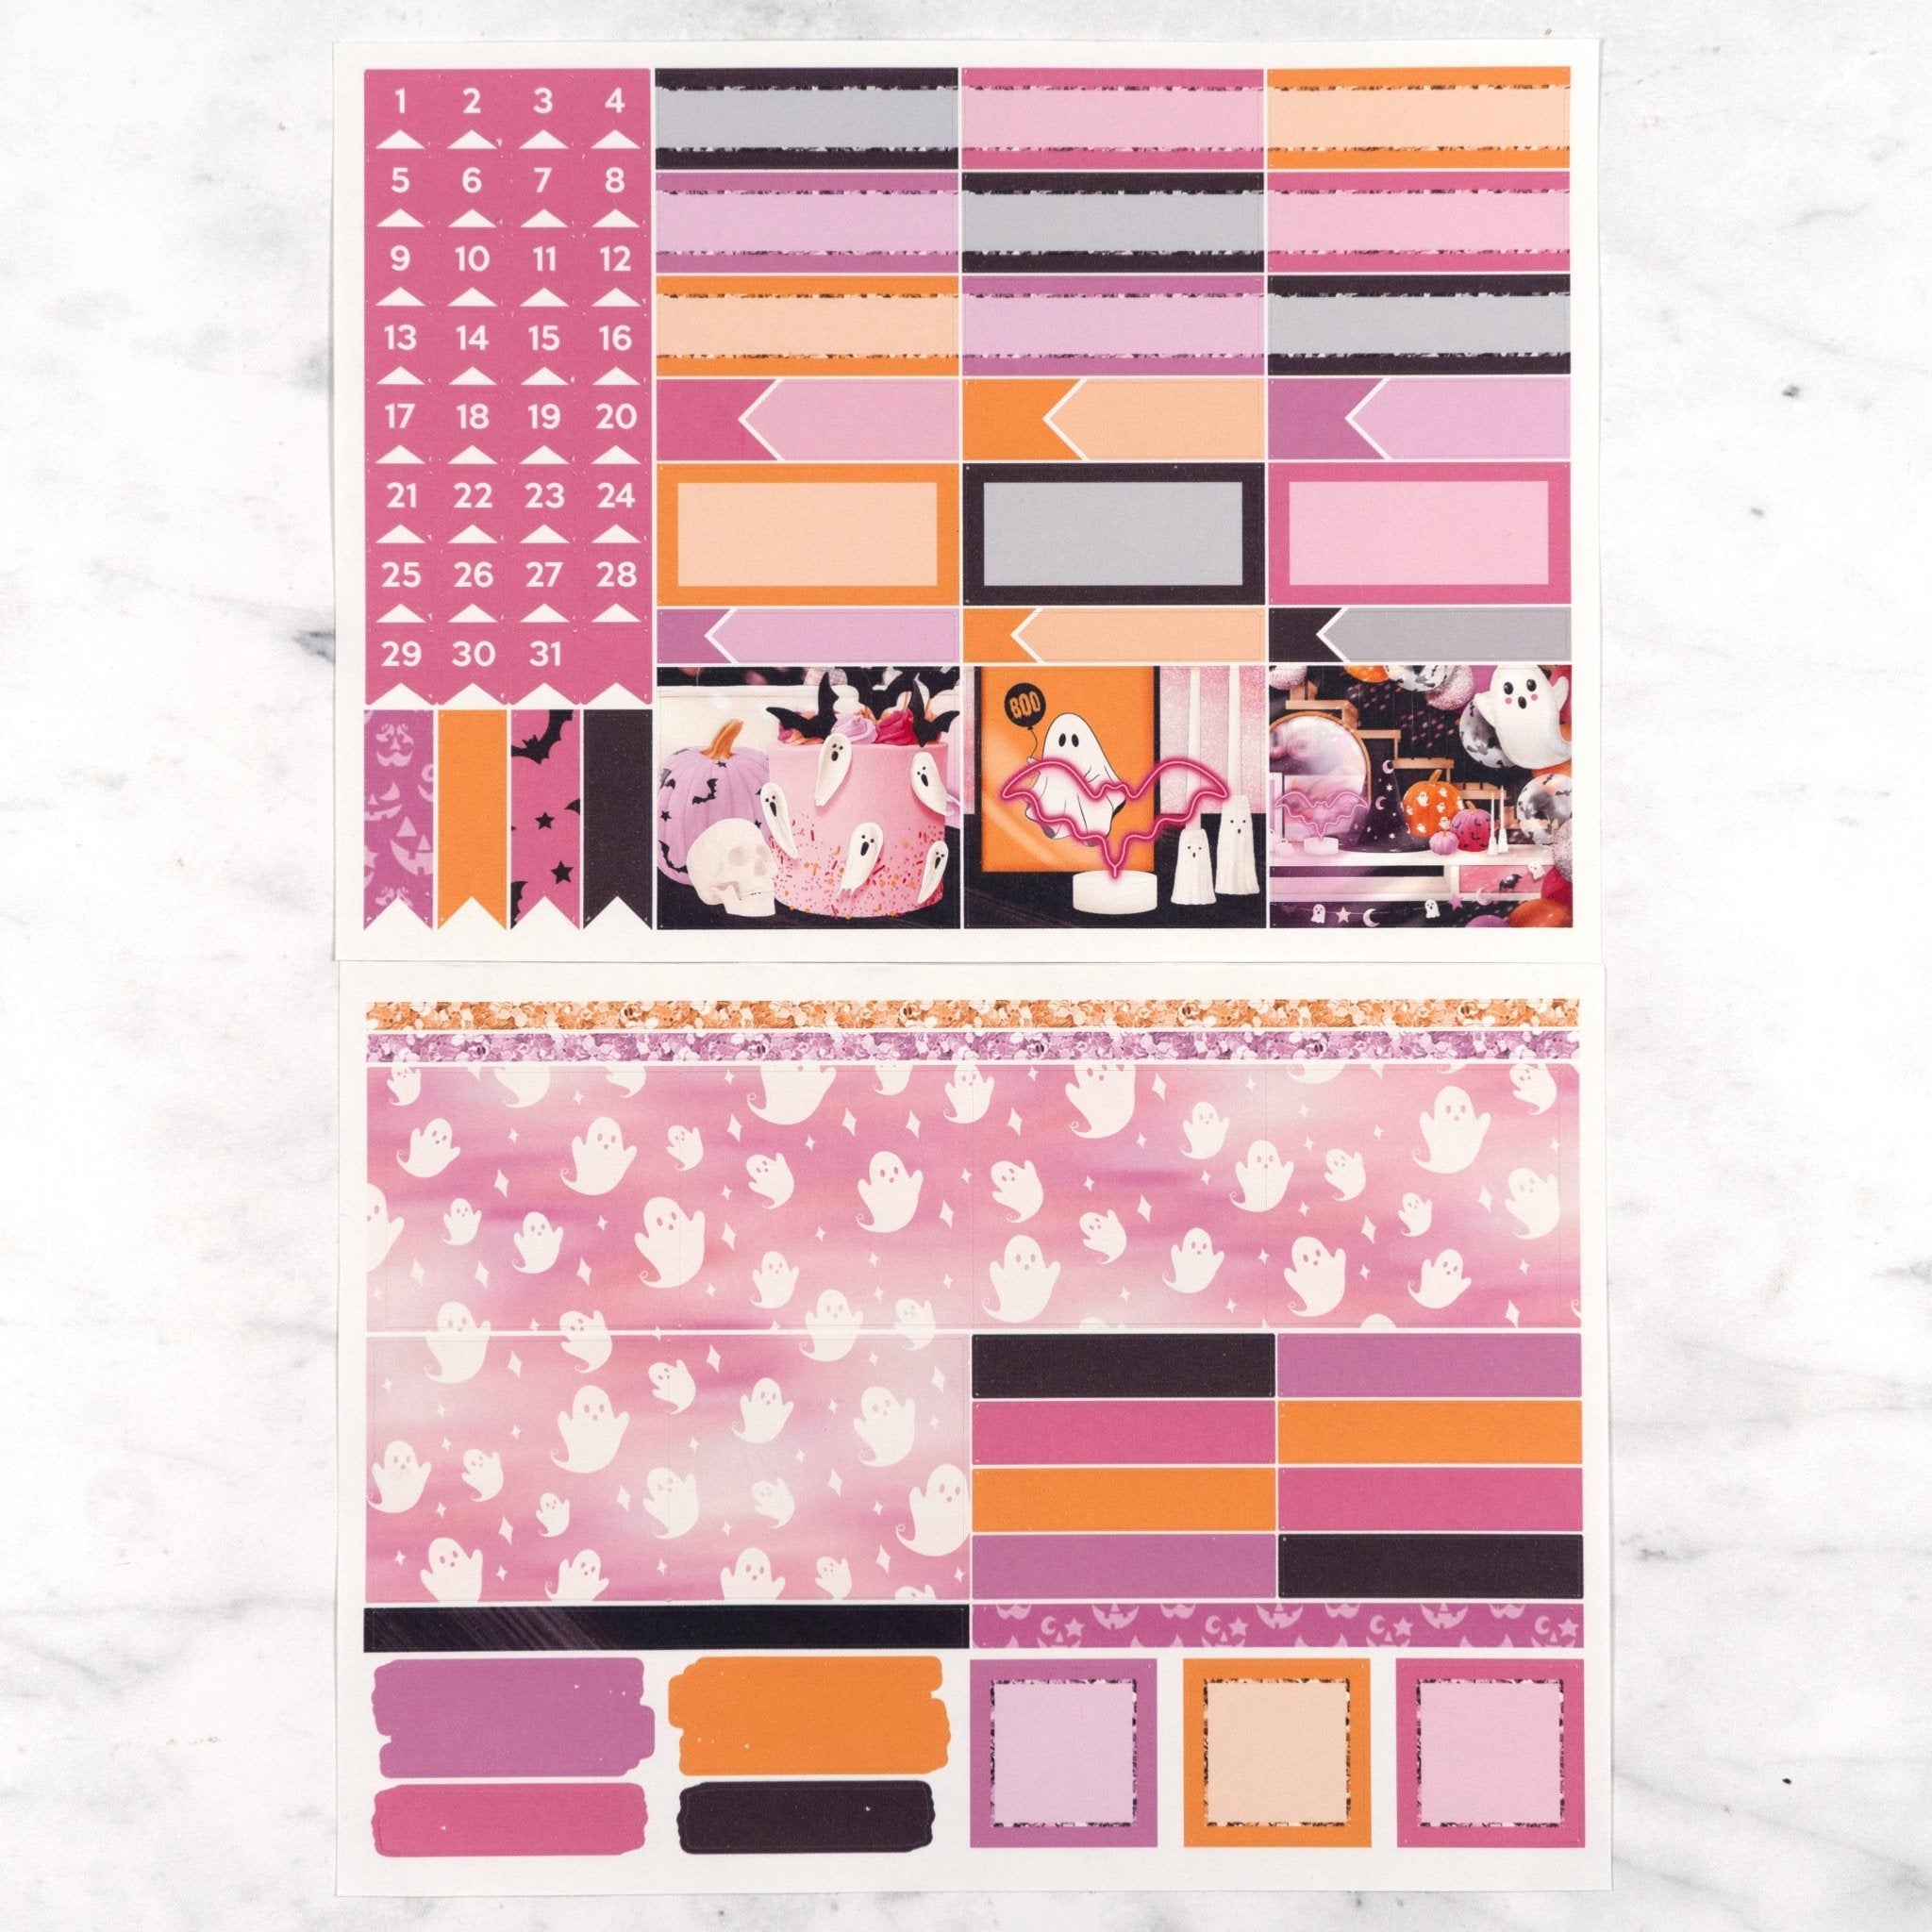 Boo Monthly Kit by Plannerface